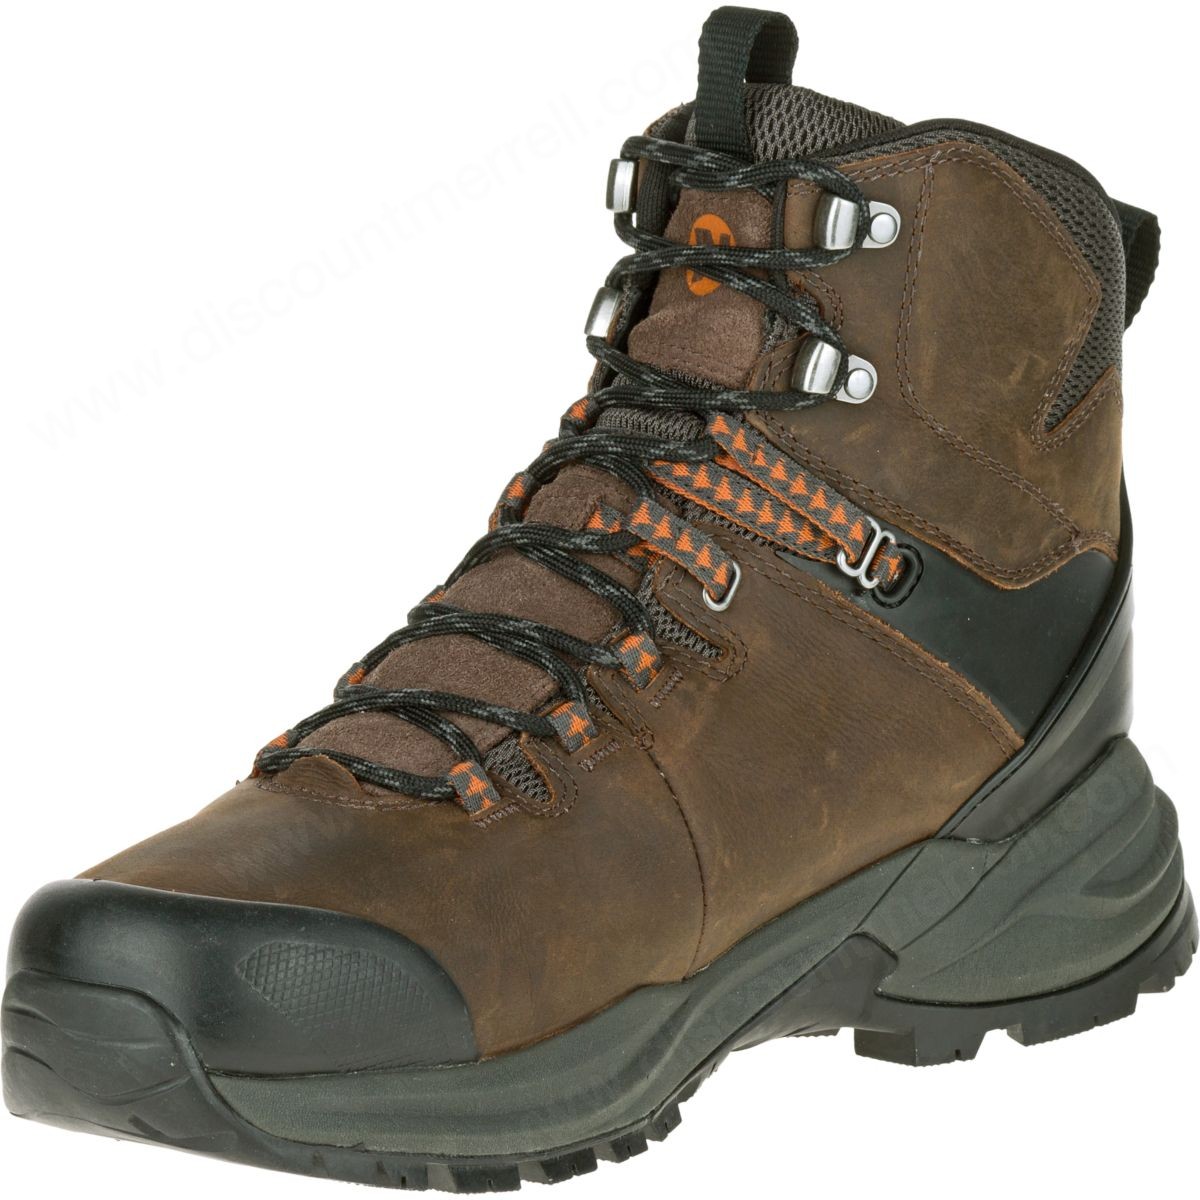 Merrell Man's Phaserbound Waterproof Clay - -5